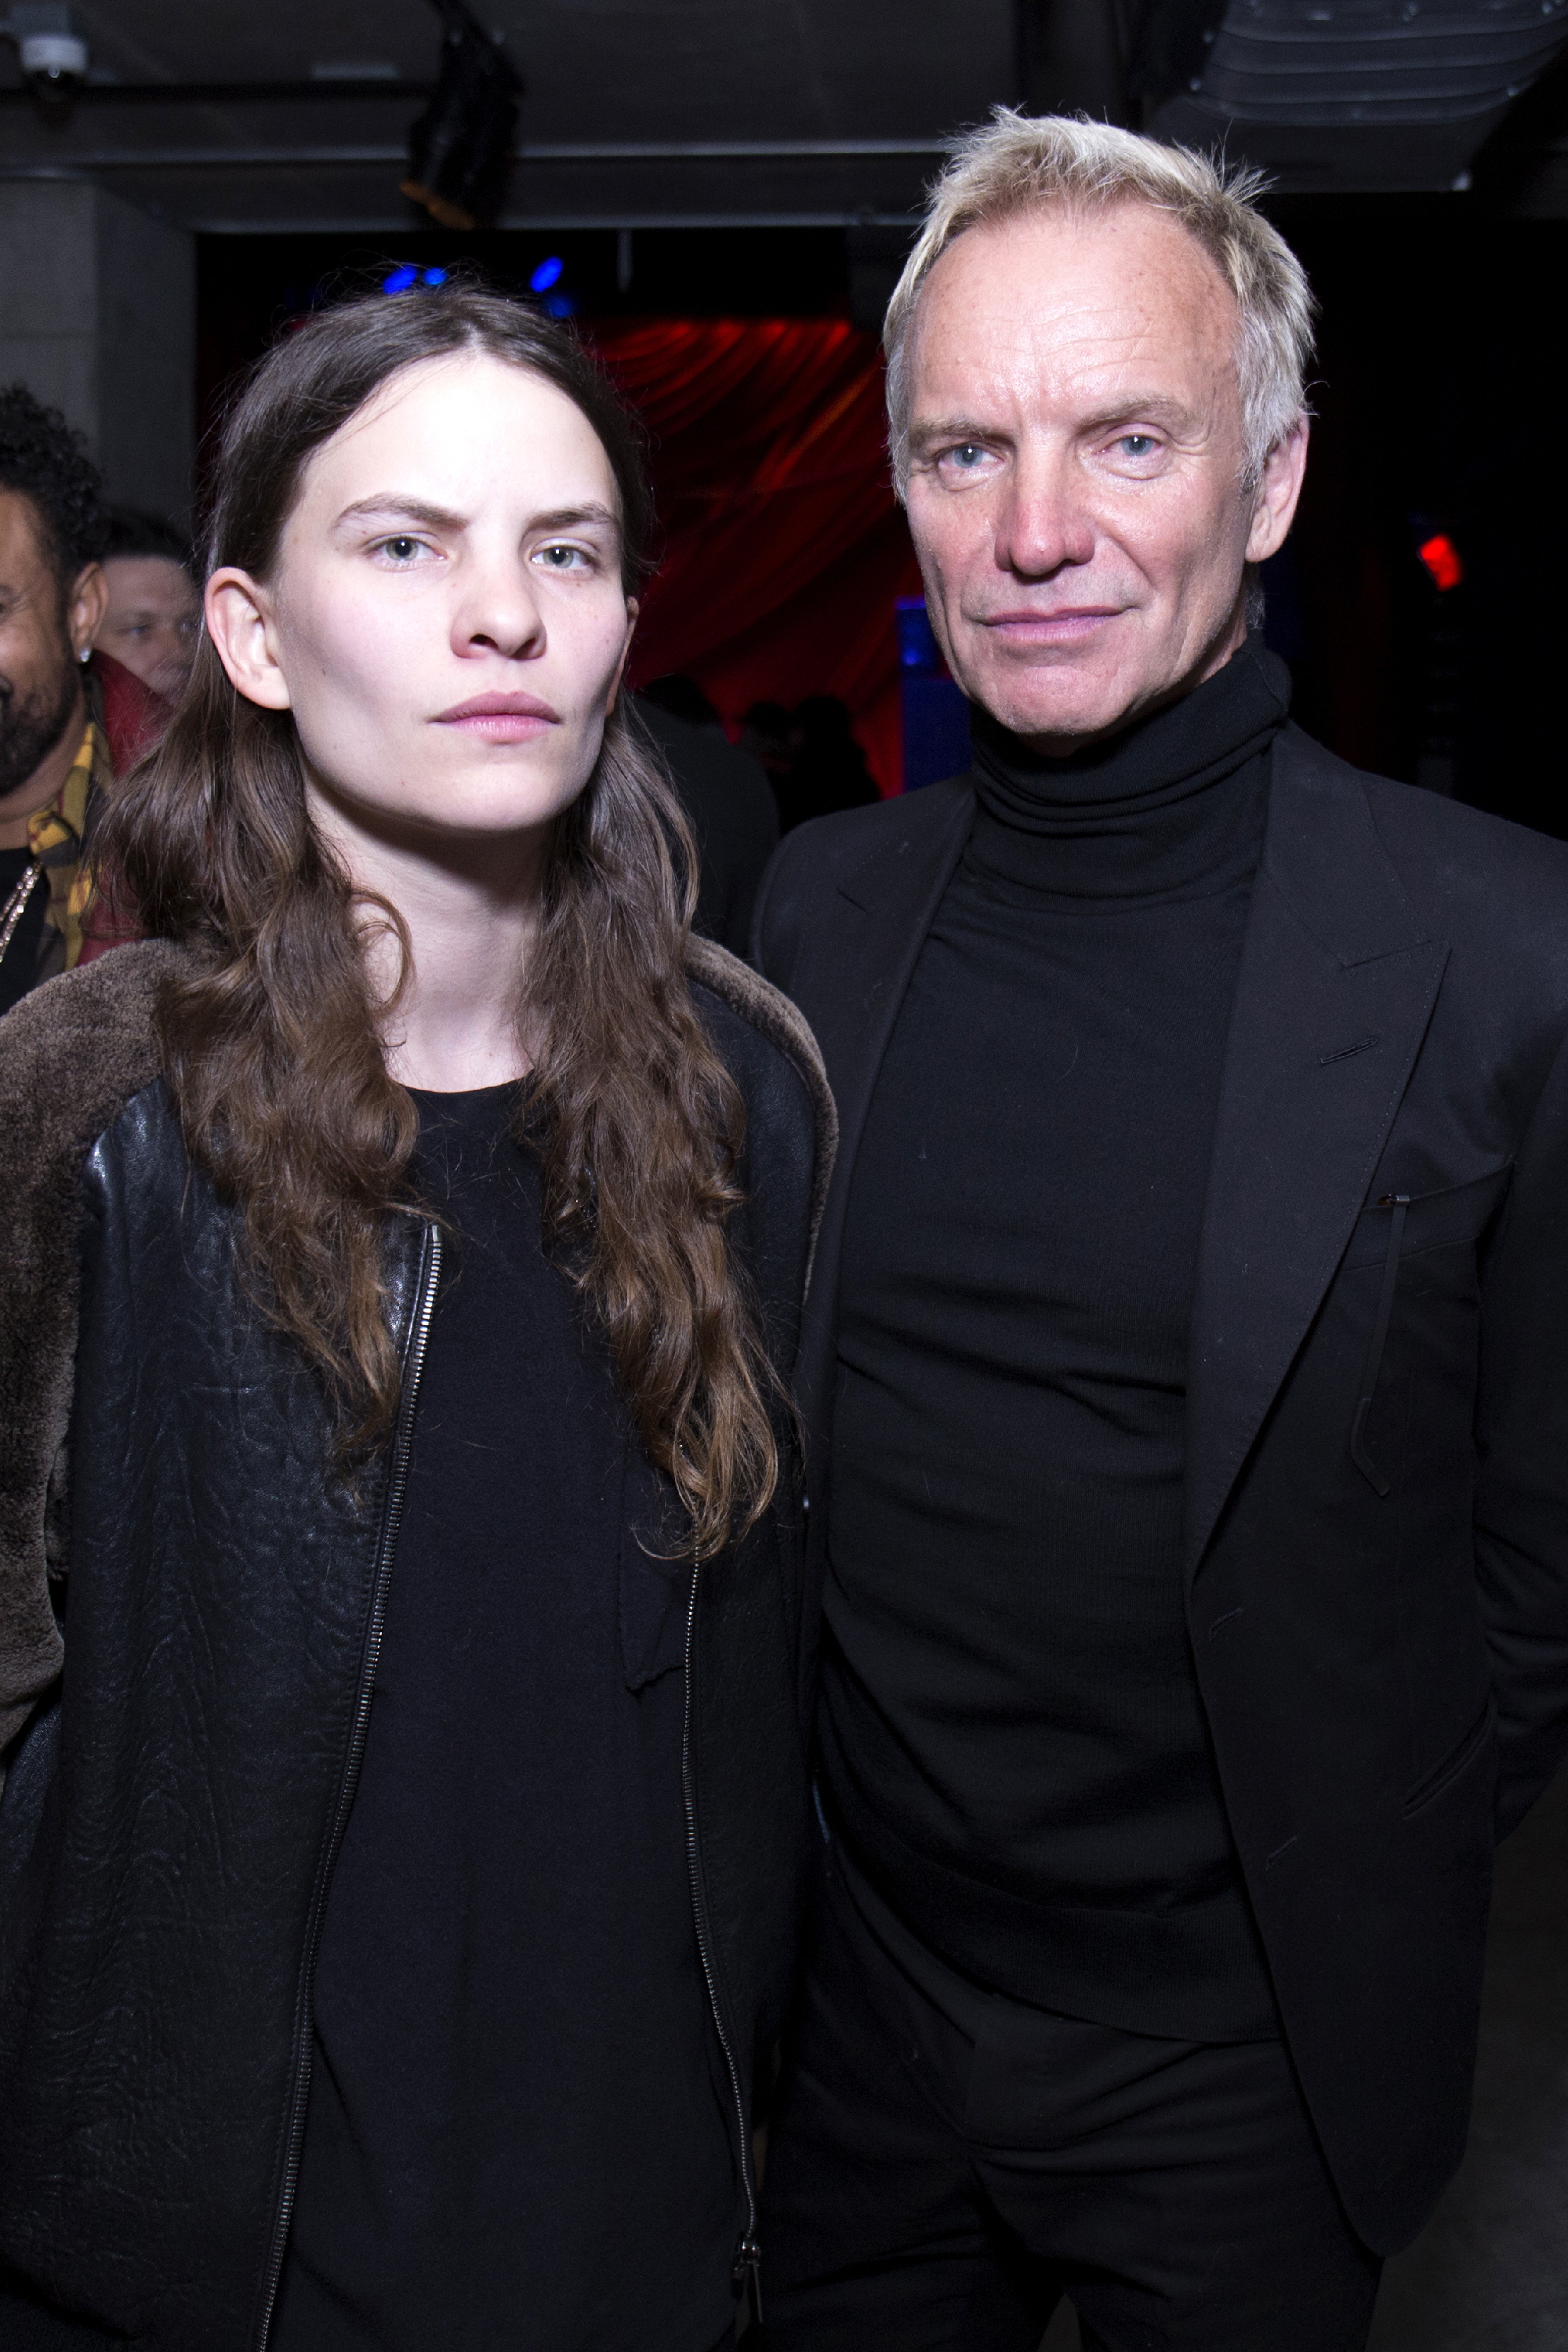 Eliot Sumner and Sting attend the premiere of "Freak Show" on January 10, 2018 in New York City | Source: Getty Images